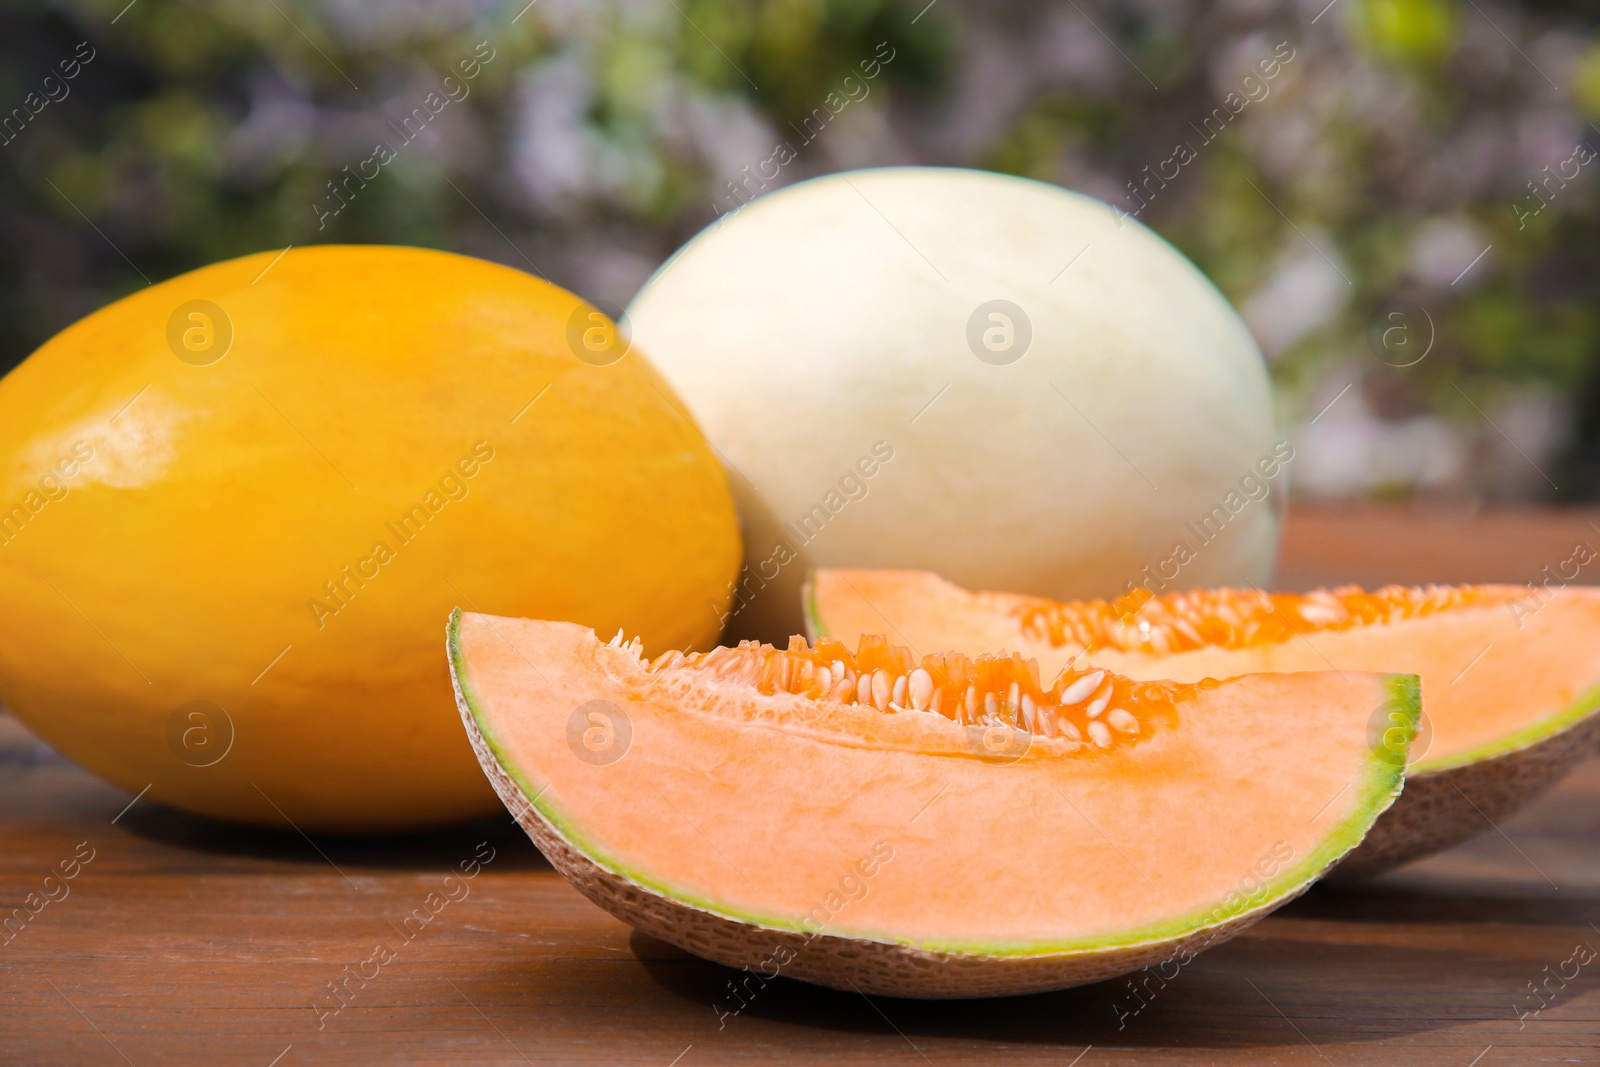 Photo of Whole and cut ripe melons on wooden table outdoors